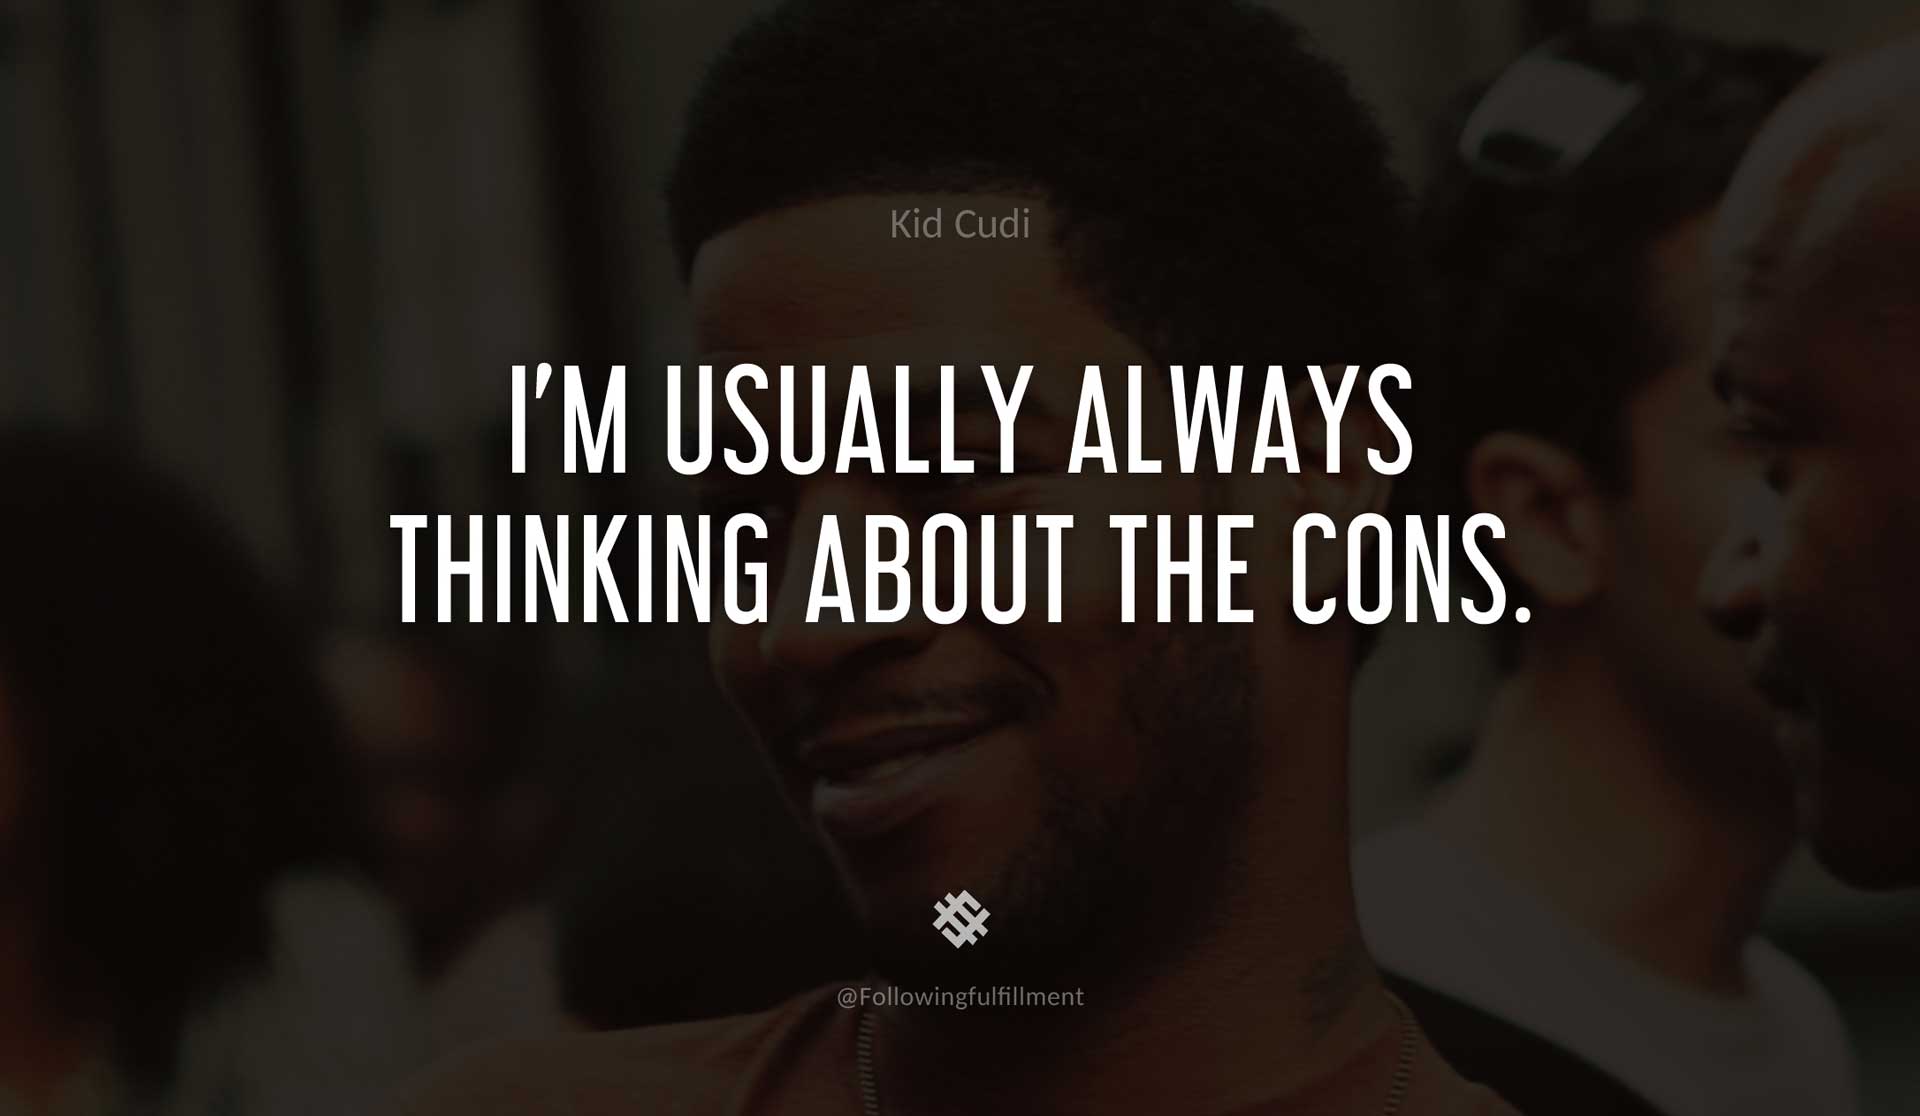 I'm-usually-always-thinking-about-the-cons.-KID-CUDI-Quote.jpg